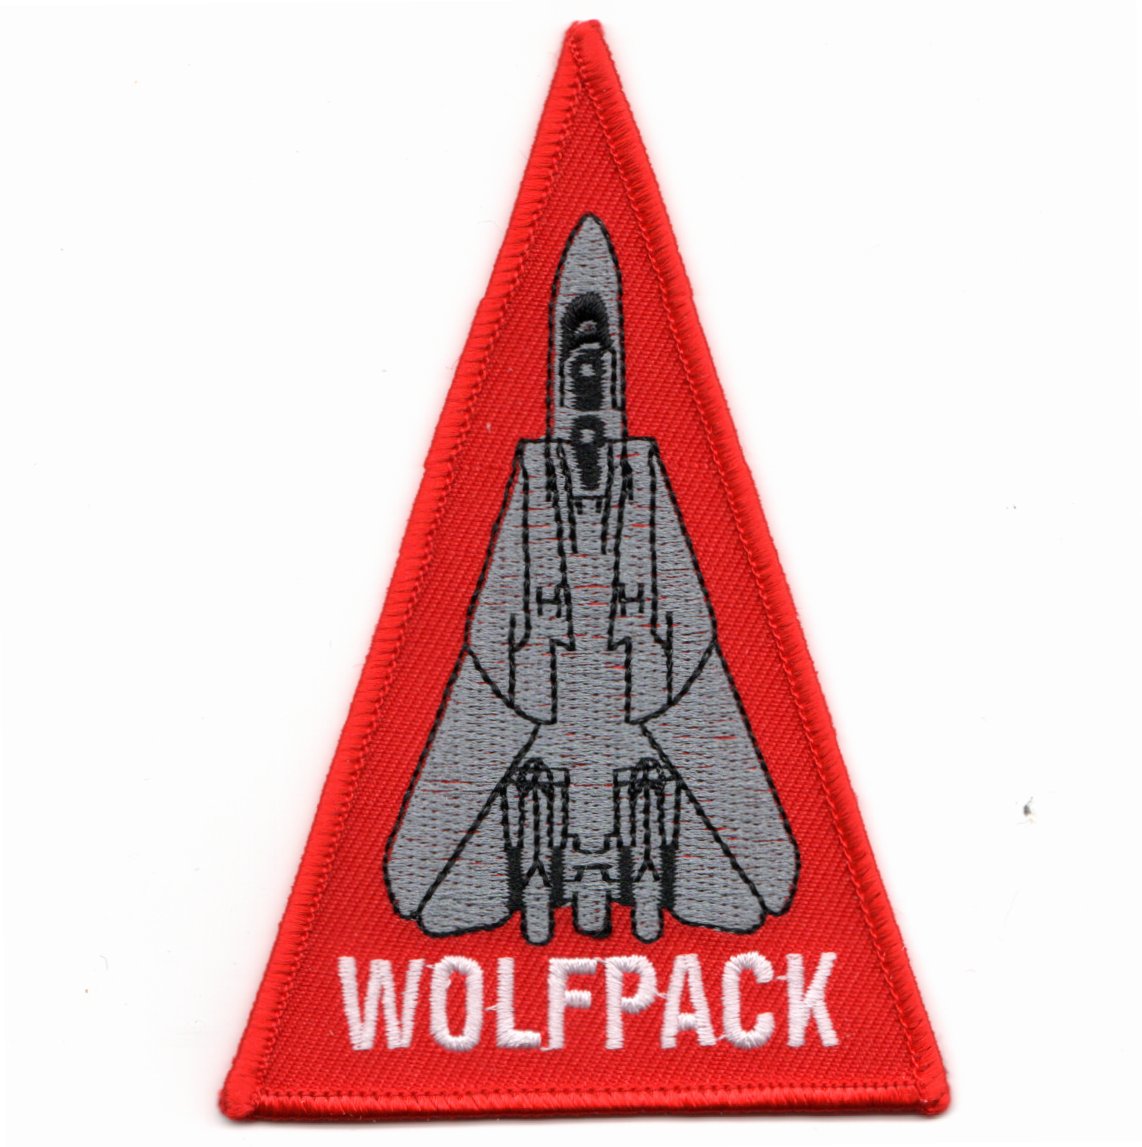 VF-1 F-14 Aircraft Patch (Red)